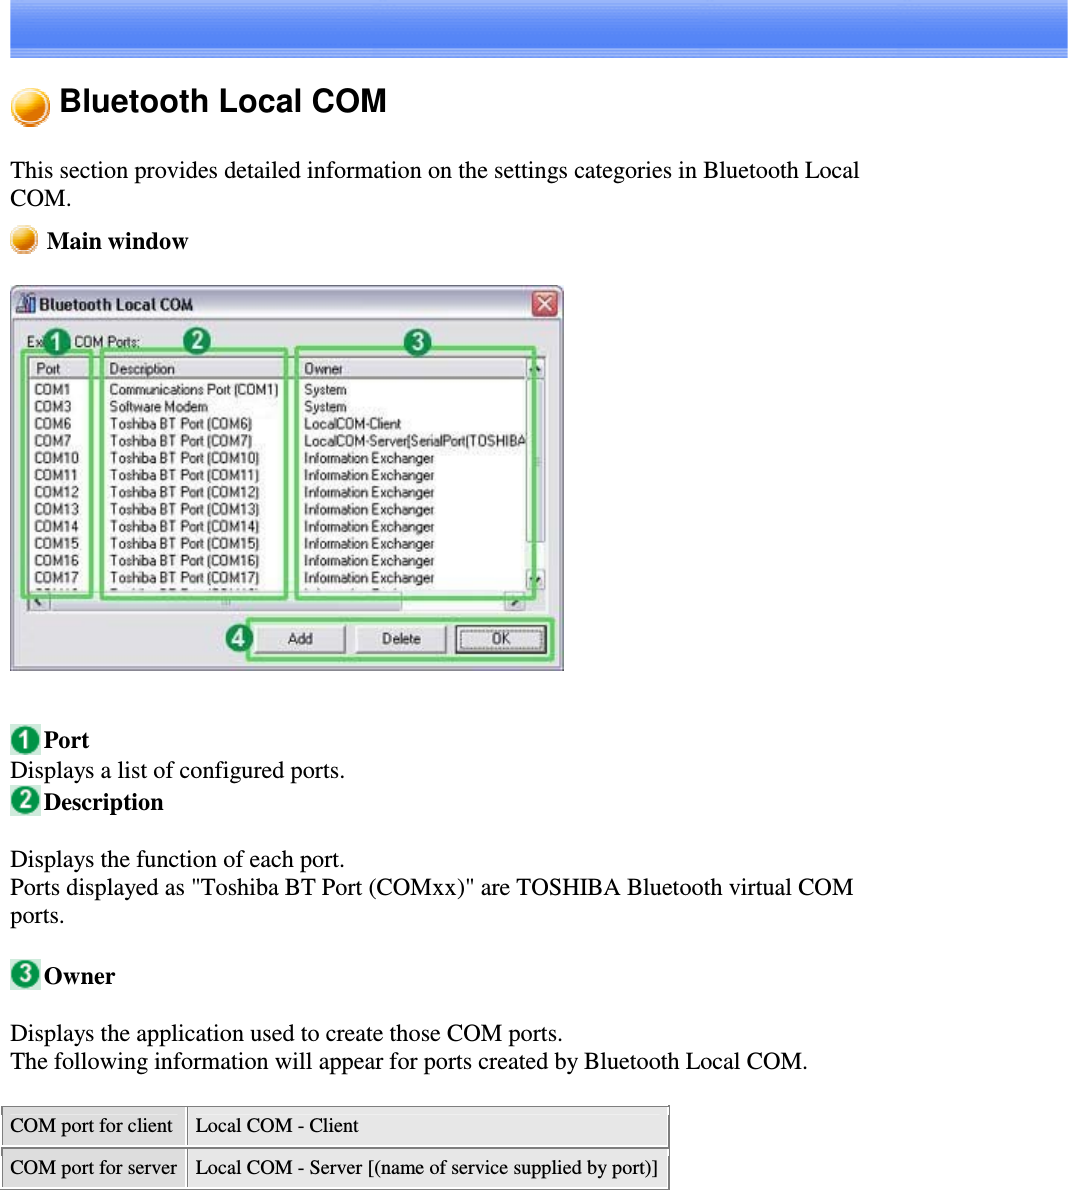 Bluetooth Local COMThis section provides detailed information on the settings categories in Bluetooth LocalCOM.Main windowPortDisplays a list of configured ports.DescriptionDisplays the function of each port.Ports displayed as &quot;Toshiba BT Port (COMxx)&quot; are TOSHIBA Bluetooth virtual COMports.OwnerDisplays the application used to create those COM ports.The following information will appear for ports created by Bluetooth Local COM.COM port for client Local COM - ClientCOM port for server Local COM - Server [(name of service supplied by port)]